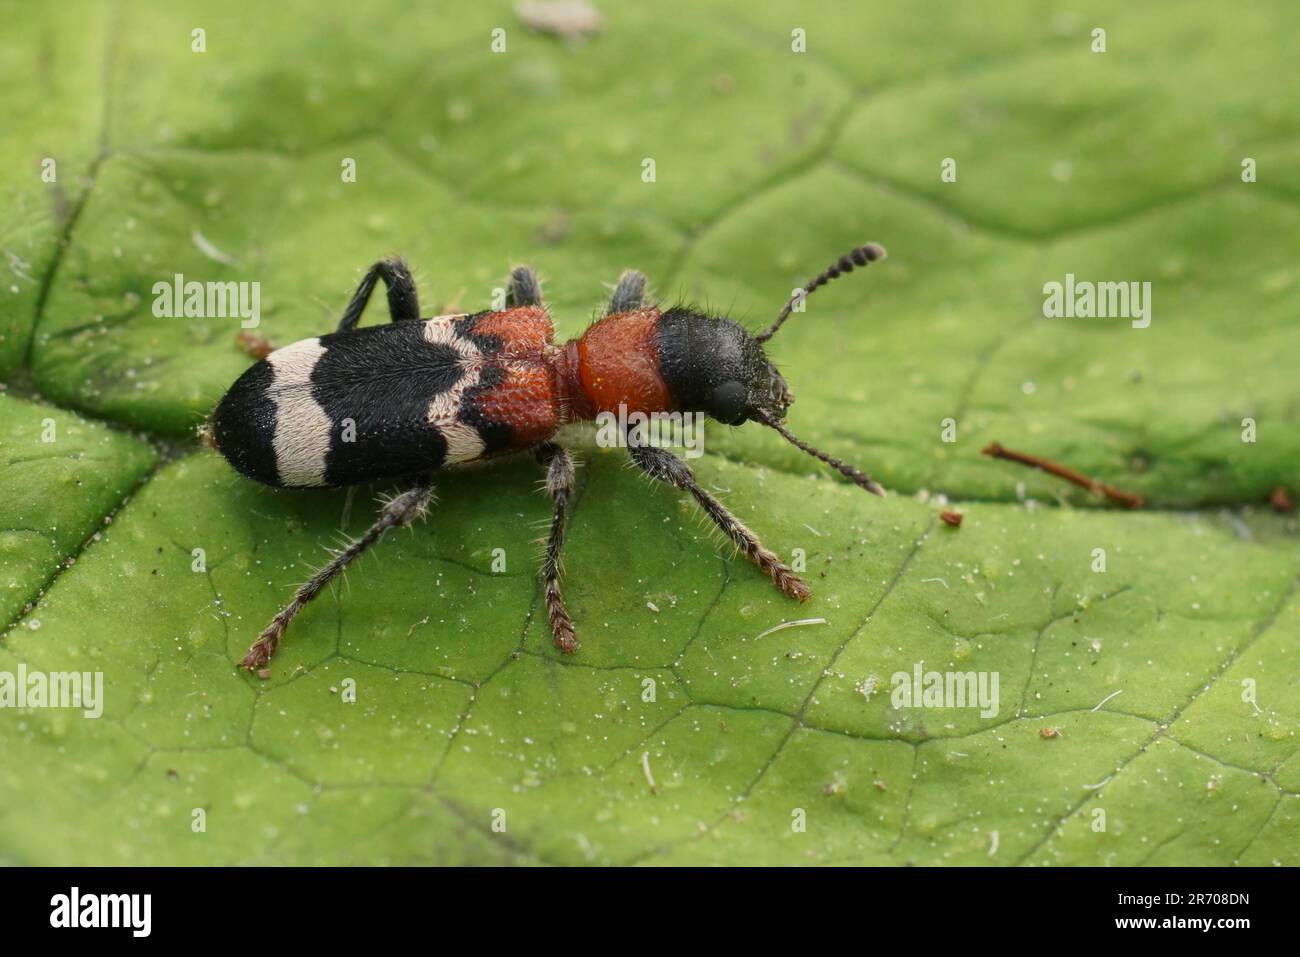 Close-up n the colorful European red-bellied clerid beetle, Thanasimus formicarius on a green leaf Stock Photo